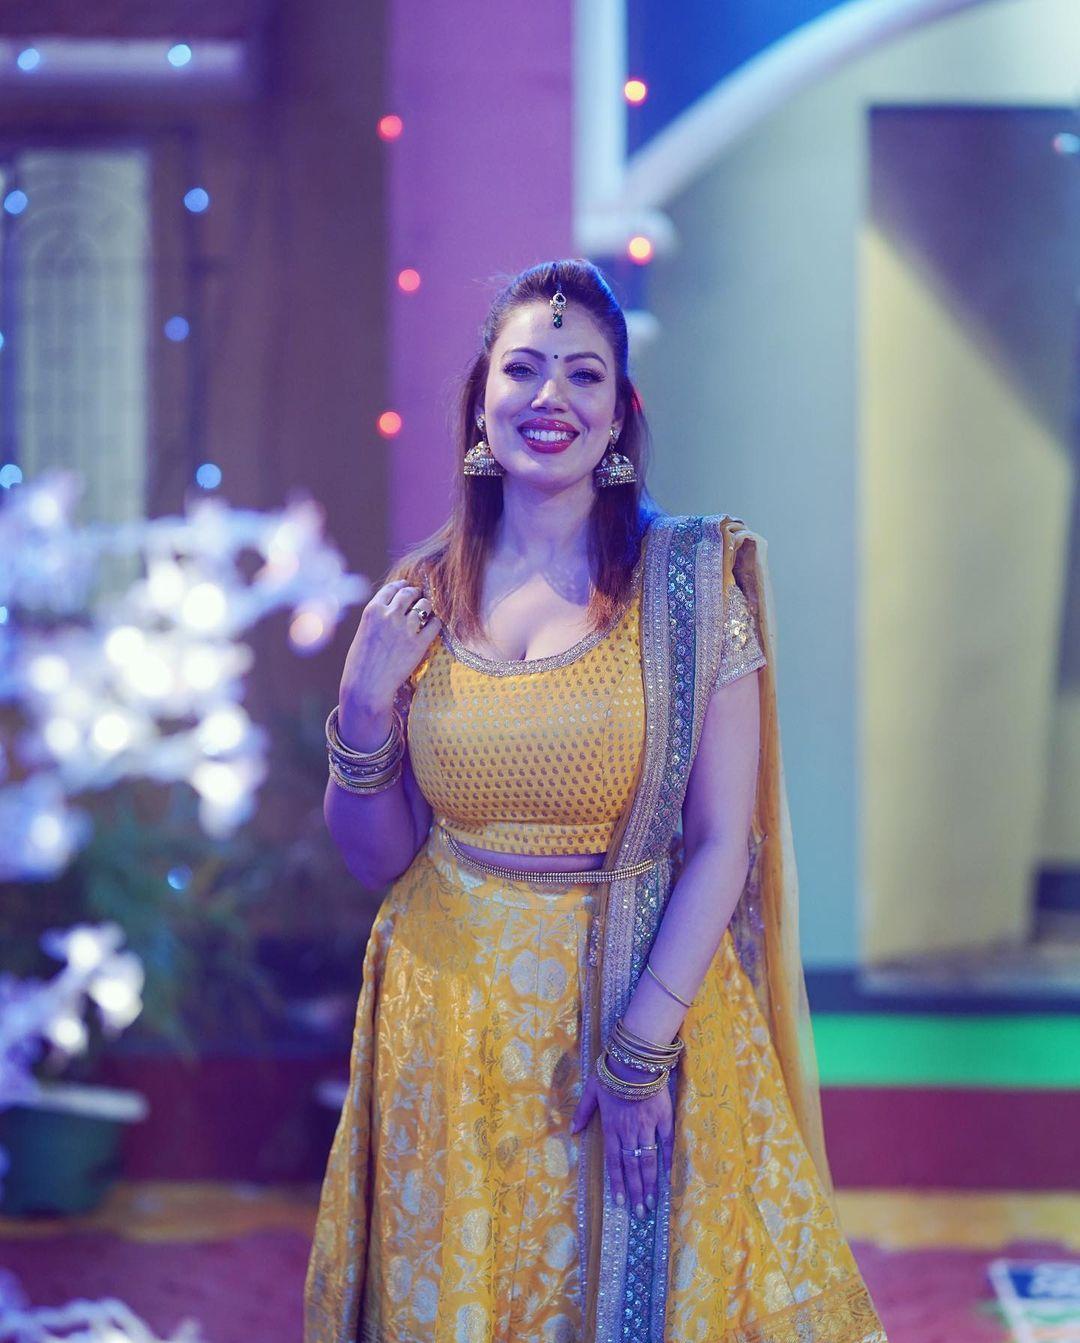 This picture of the actress is from the set of TMKOC. In the picture, the actress wore a yellow lehenga set with a contrasting dupatta